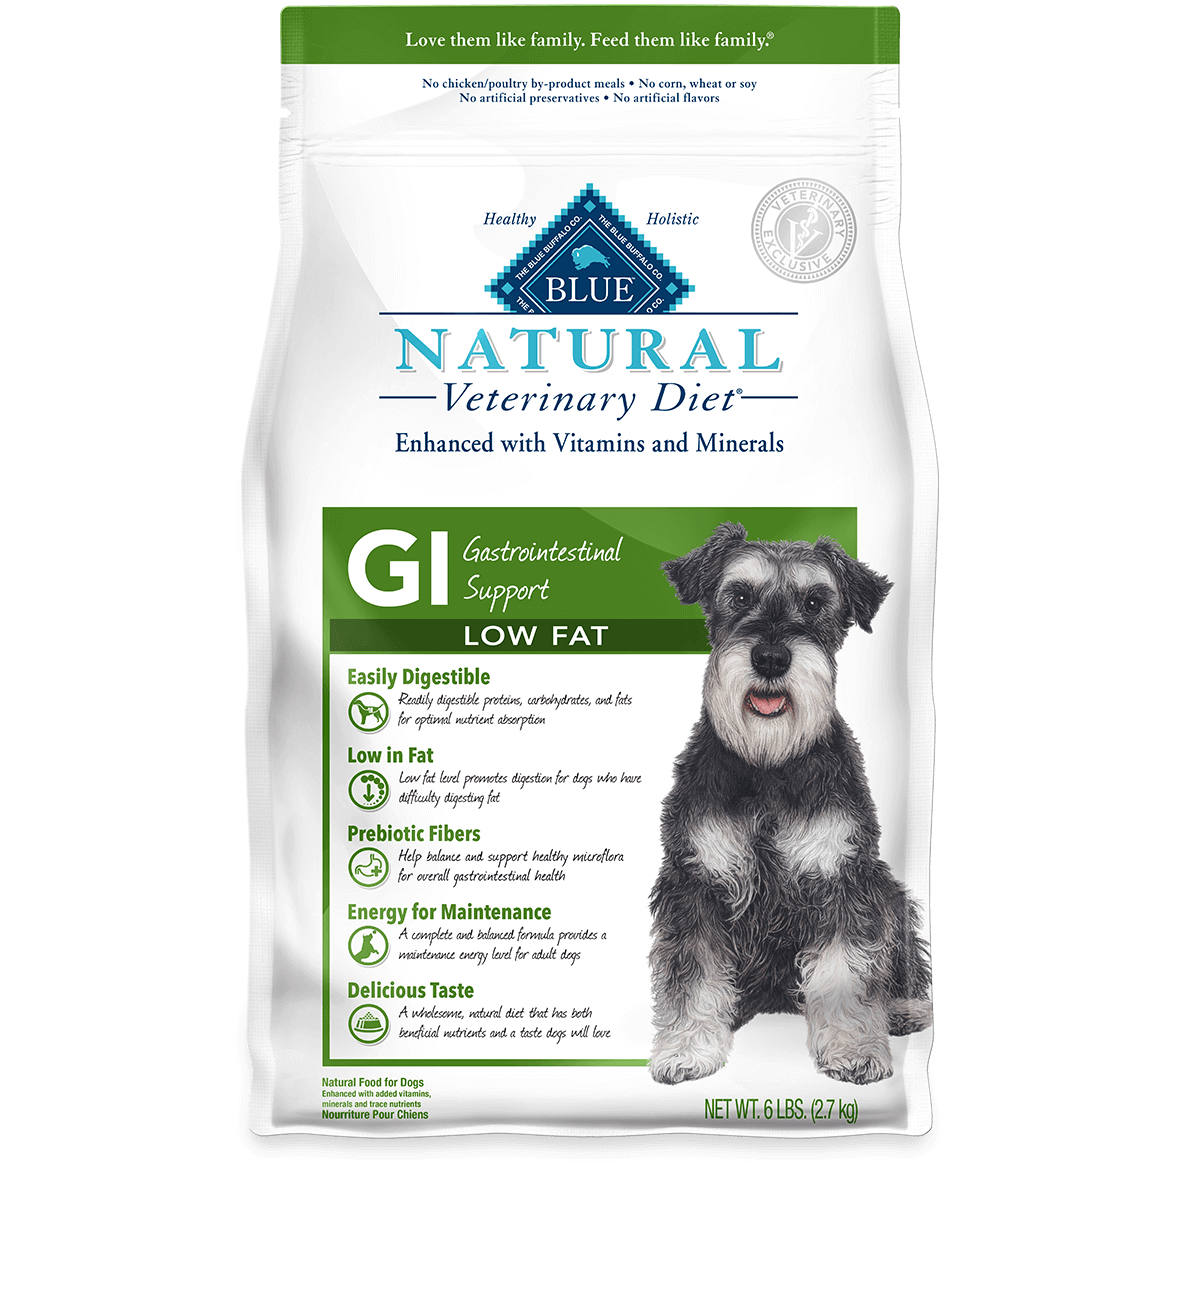 blue natural veterinary diet gi gastrointestinal support low fat dog dry food